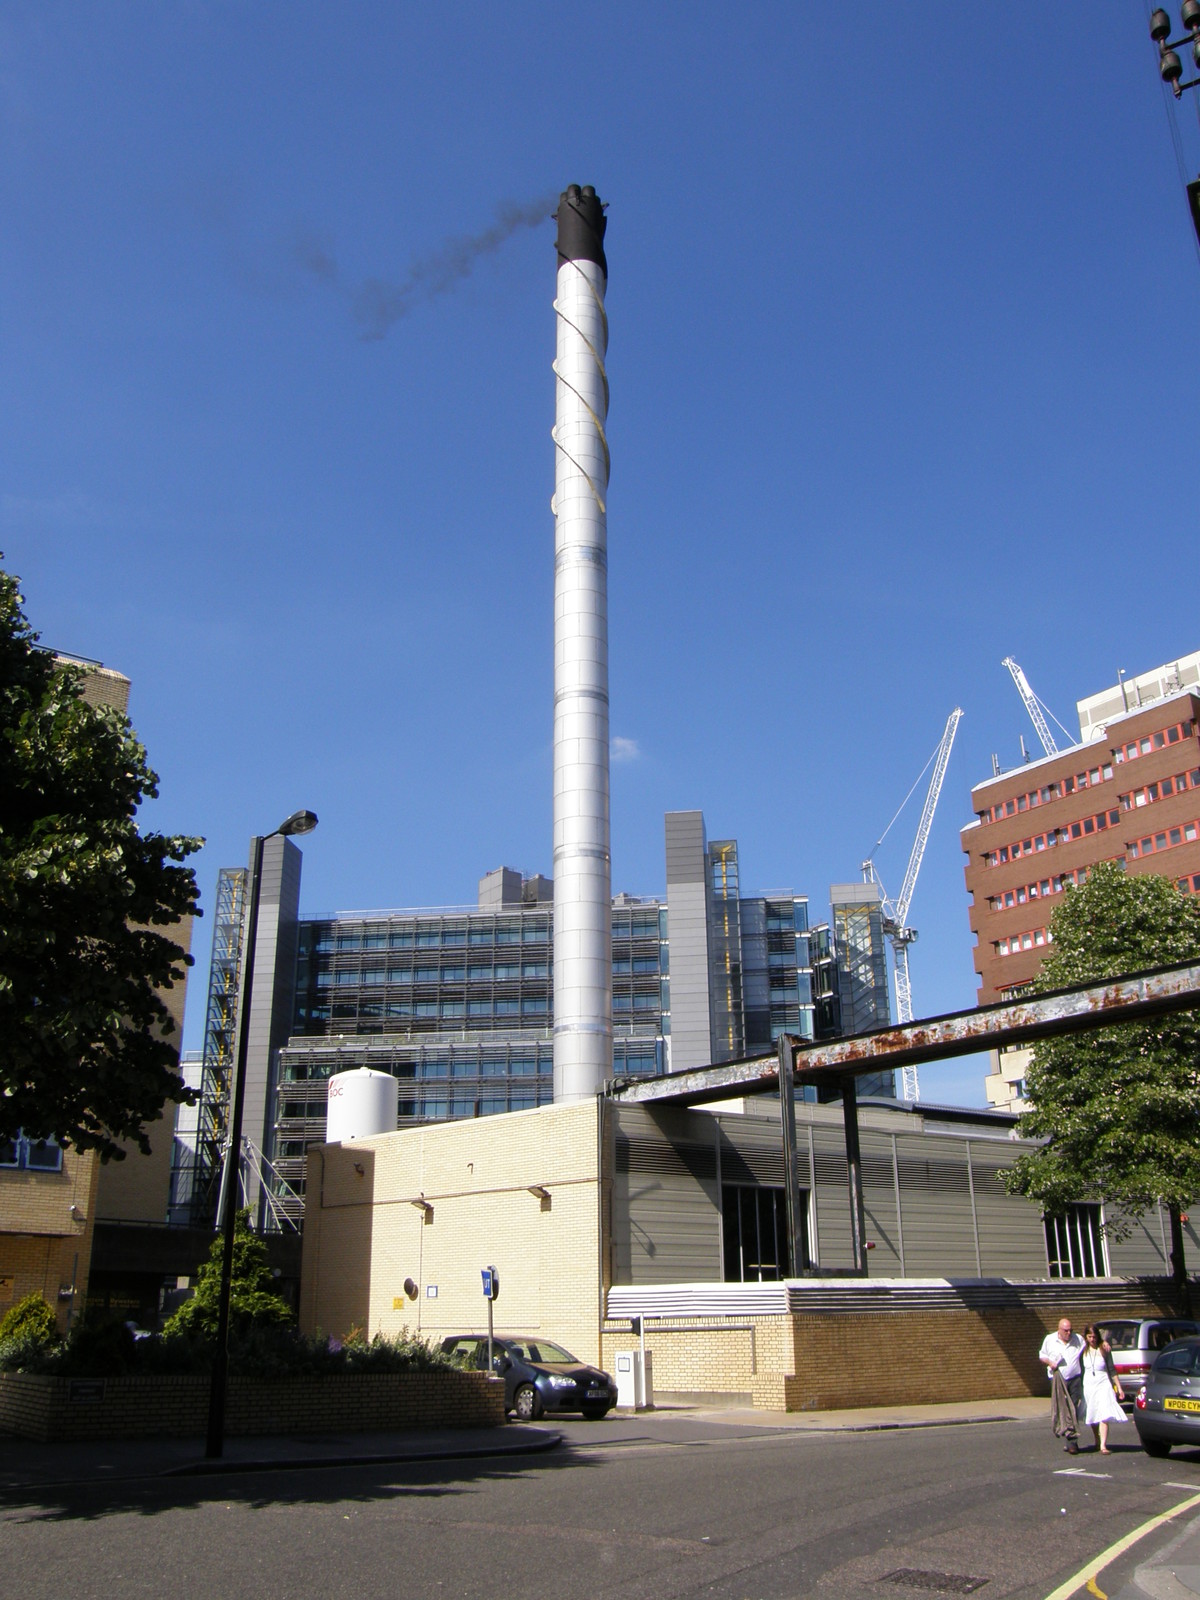 The incinerator at St Mary's Hospital, with Paddington Basin in the background